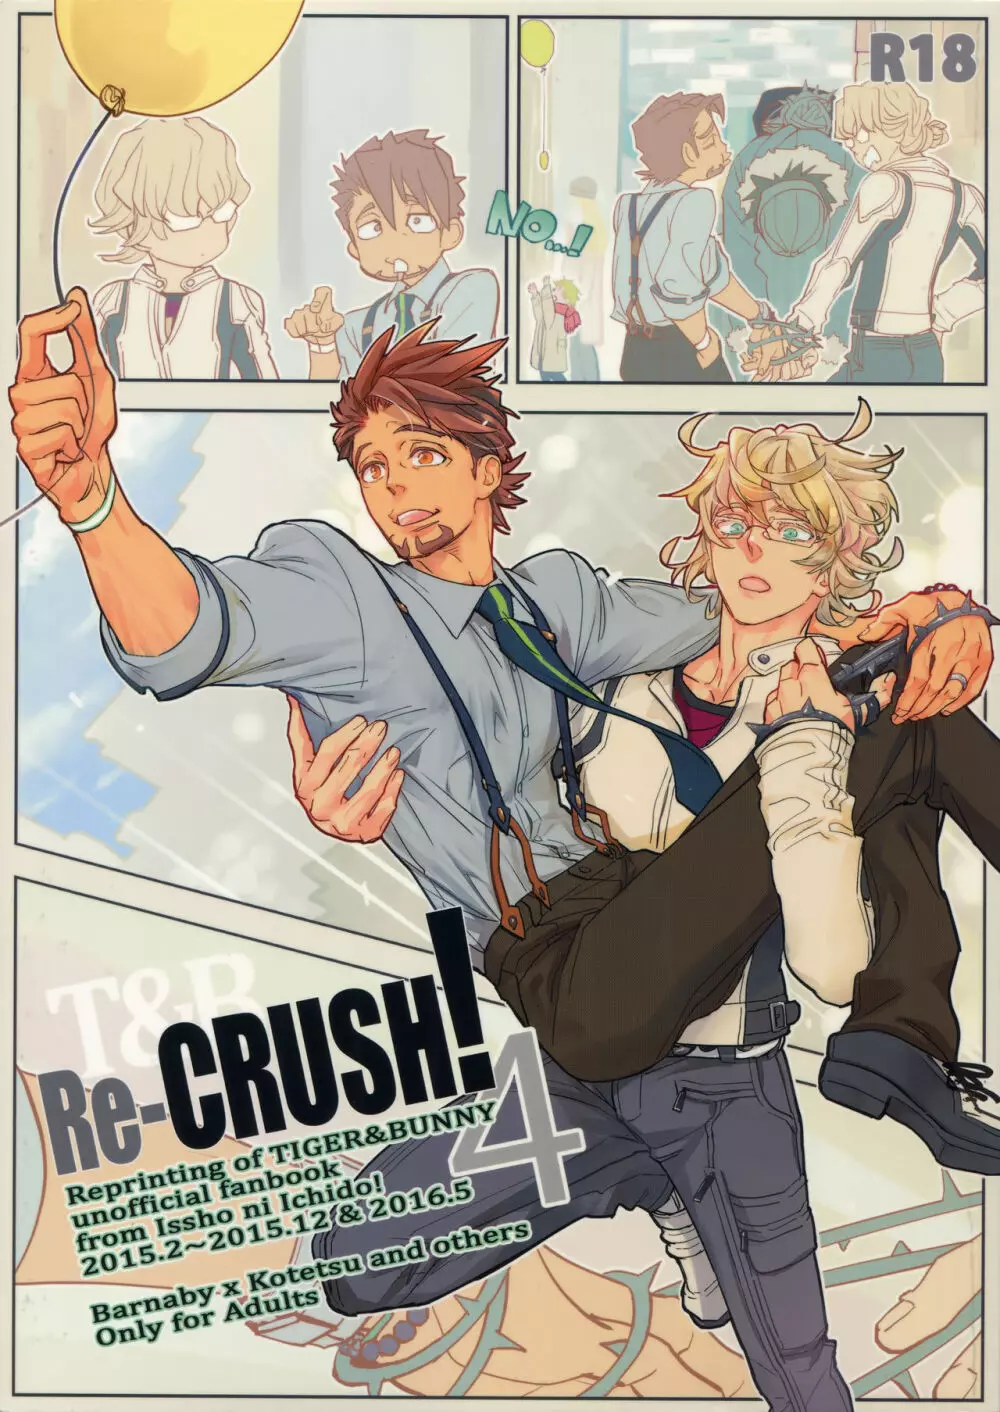 T&B Re-CRUSH!4 - page1